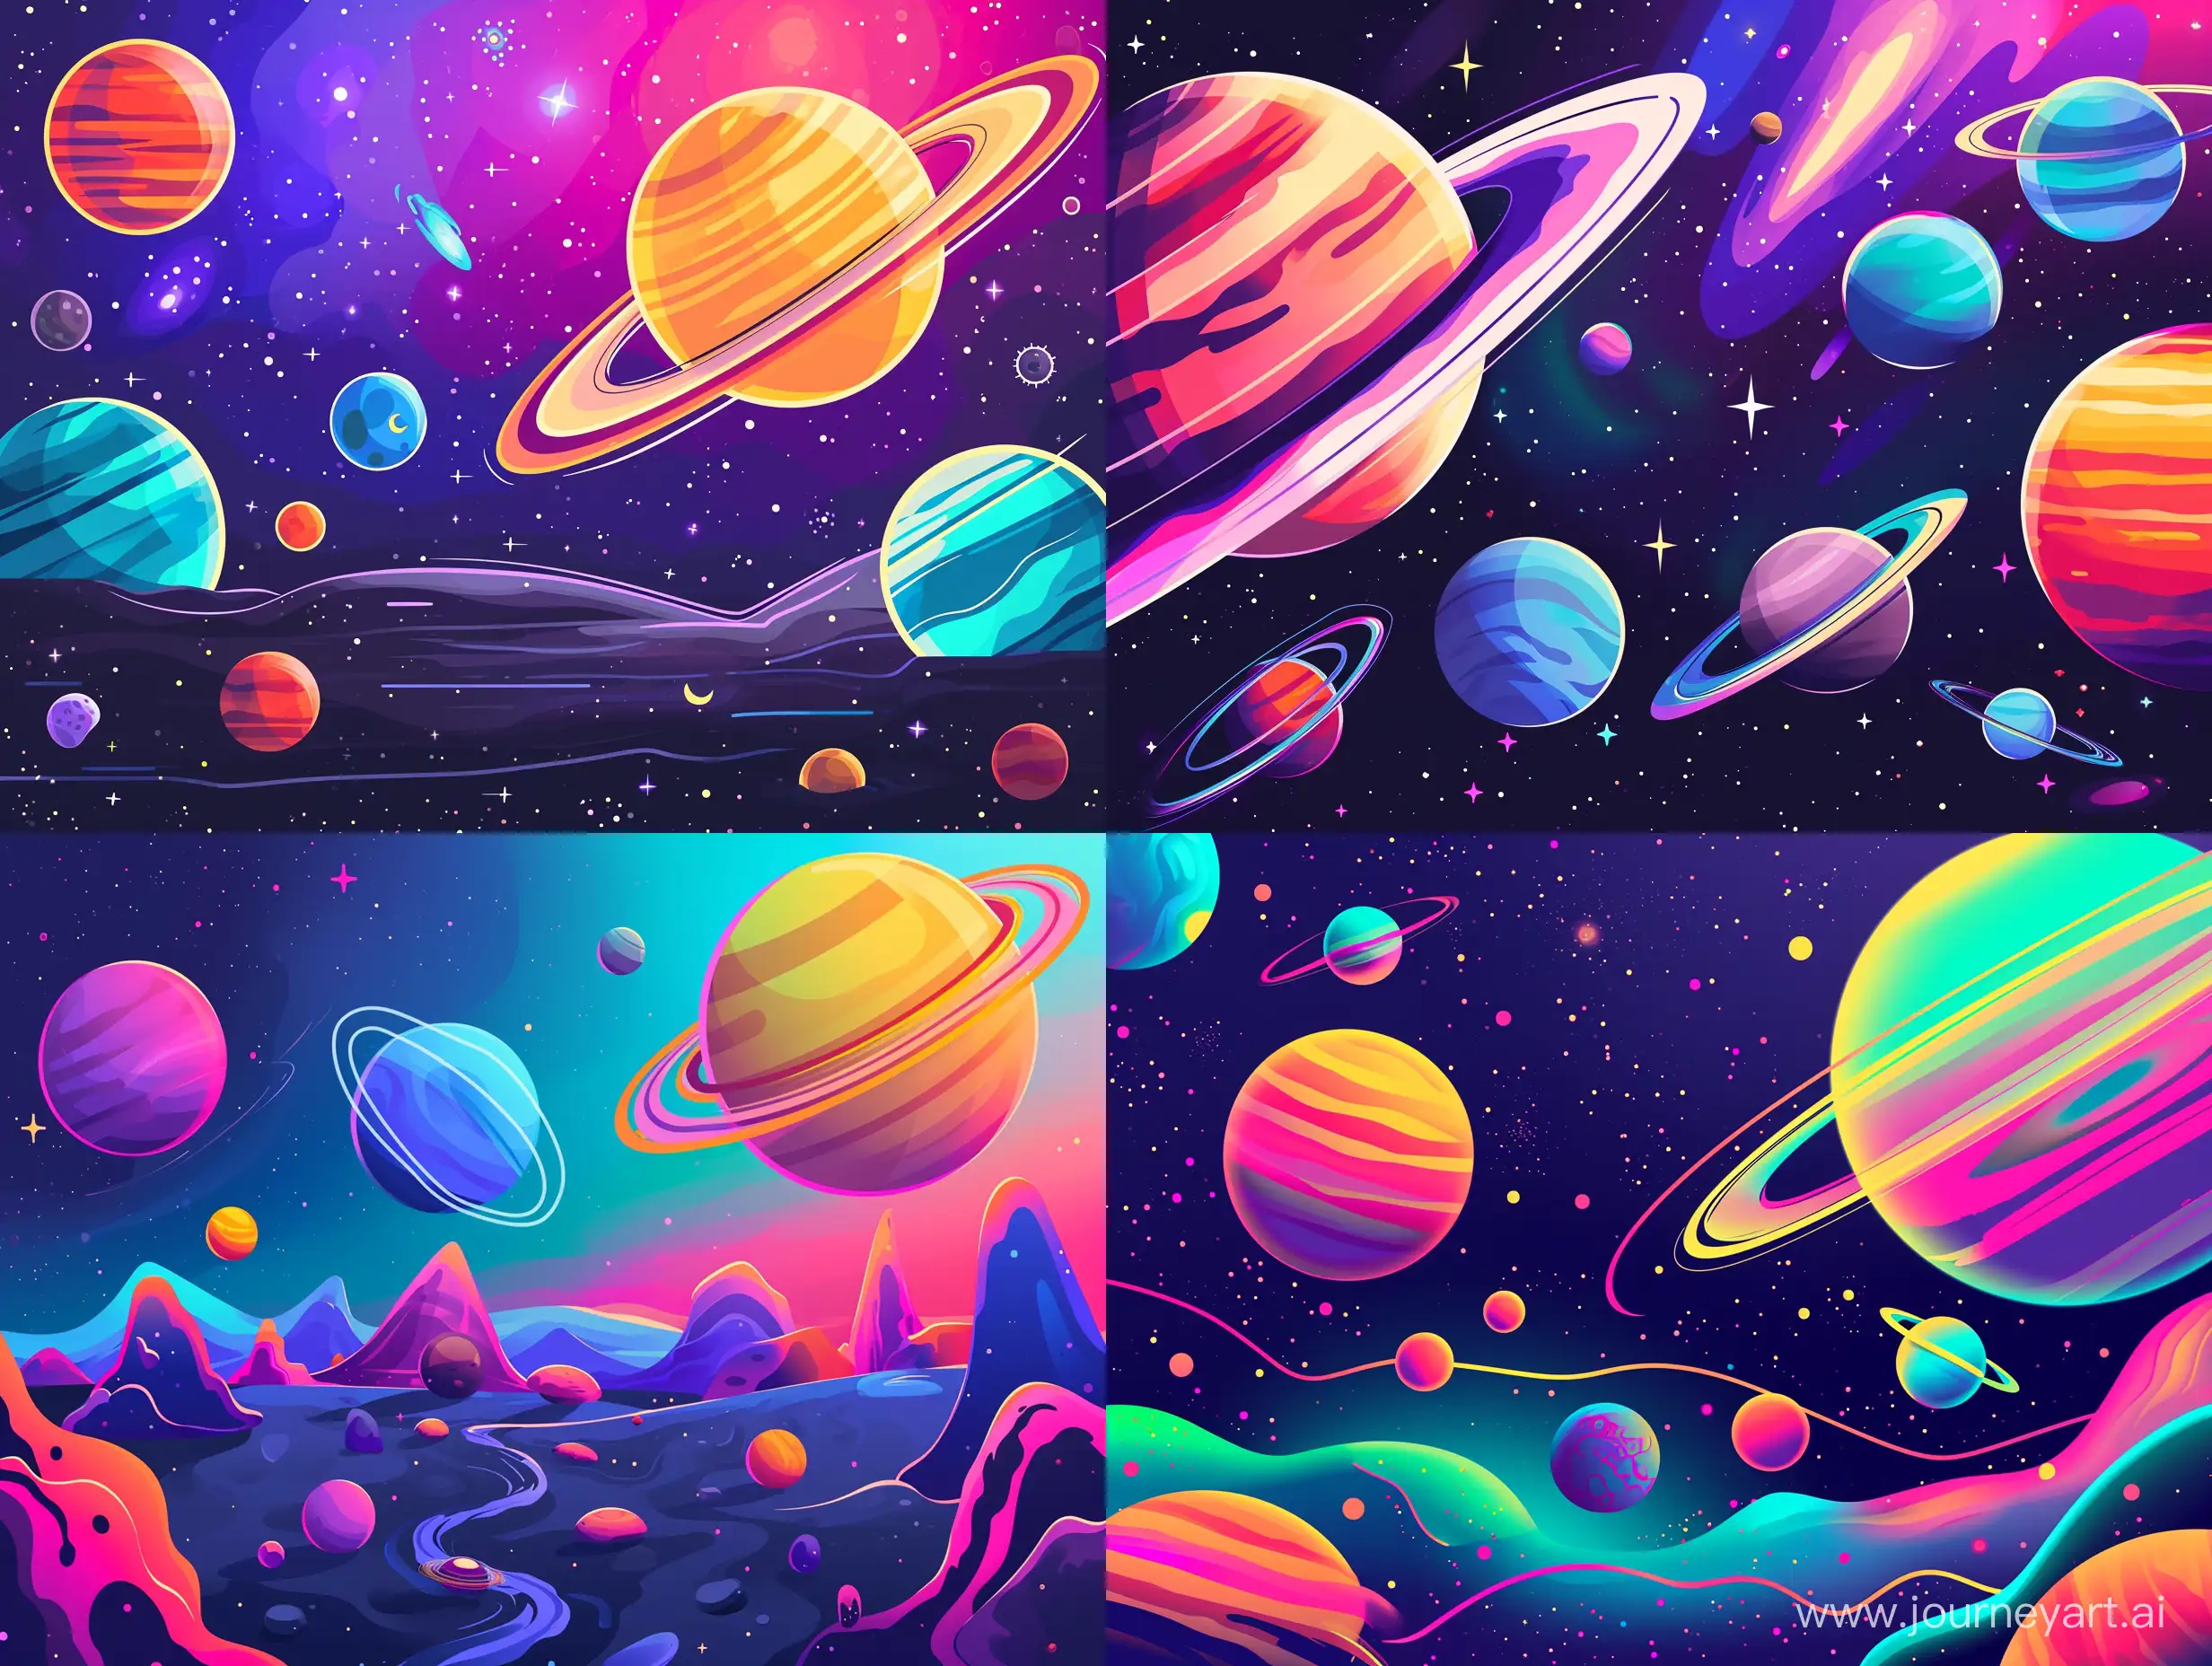 landscape of space containing at least Saturn,Jupiter,Uranus and Neptune and some other spacial thing in between. Flat style illustration with vivid bright neon colors